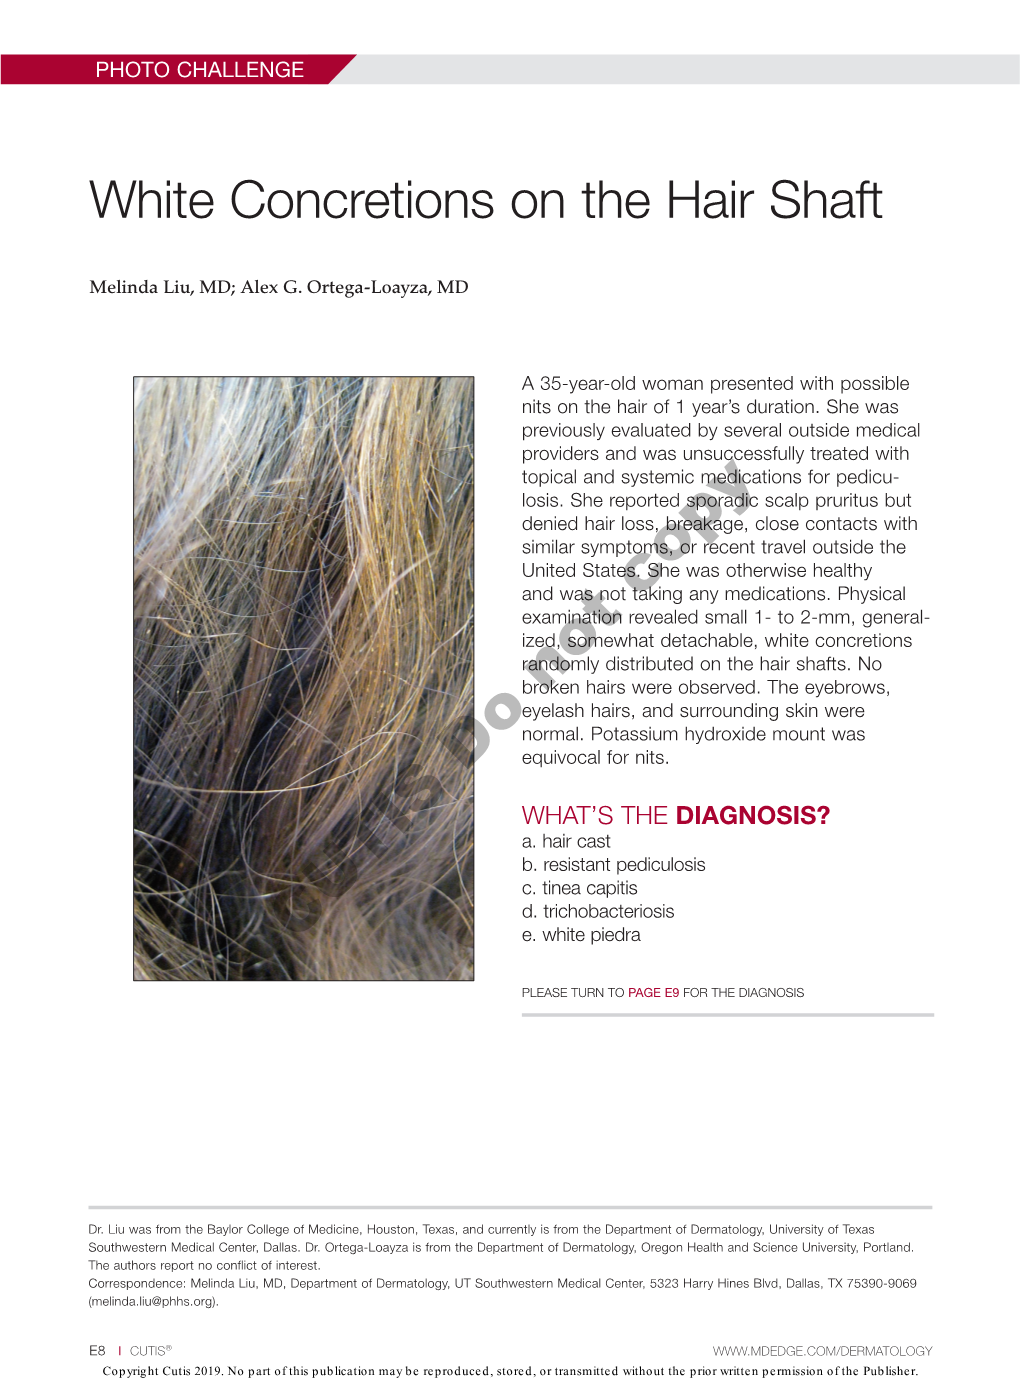 White Concretions on the Hair Shaft